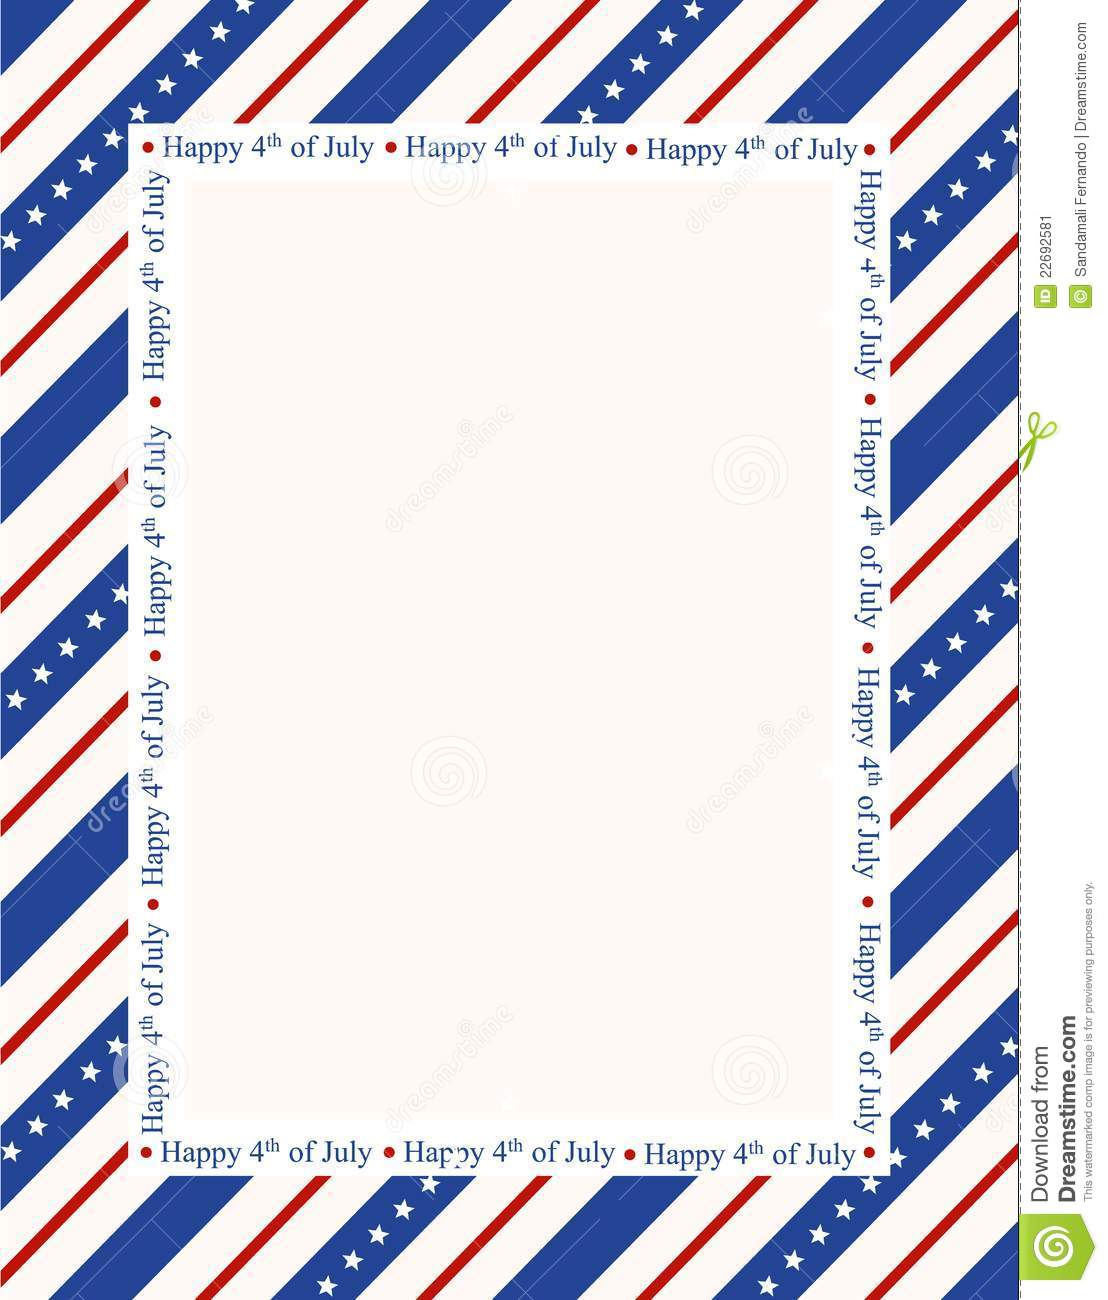     And Stripes Page Border   Frame Design With Happy 4th Of July Text